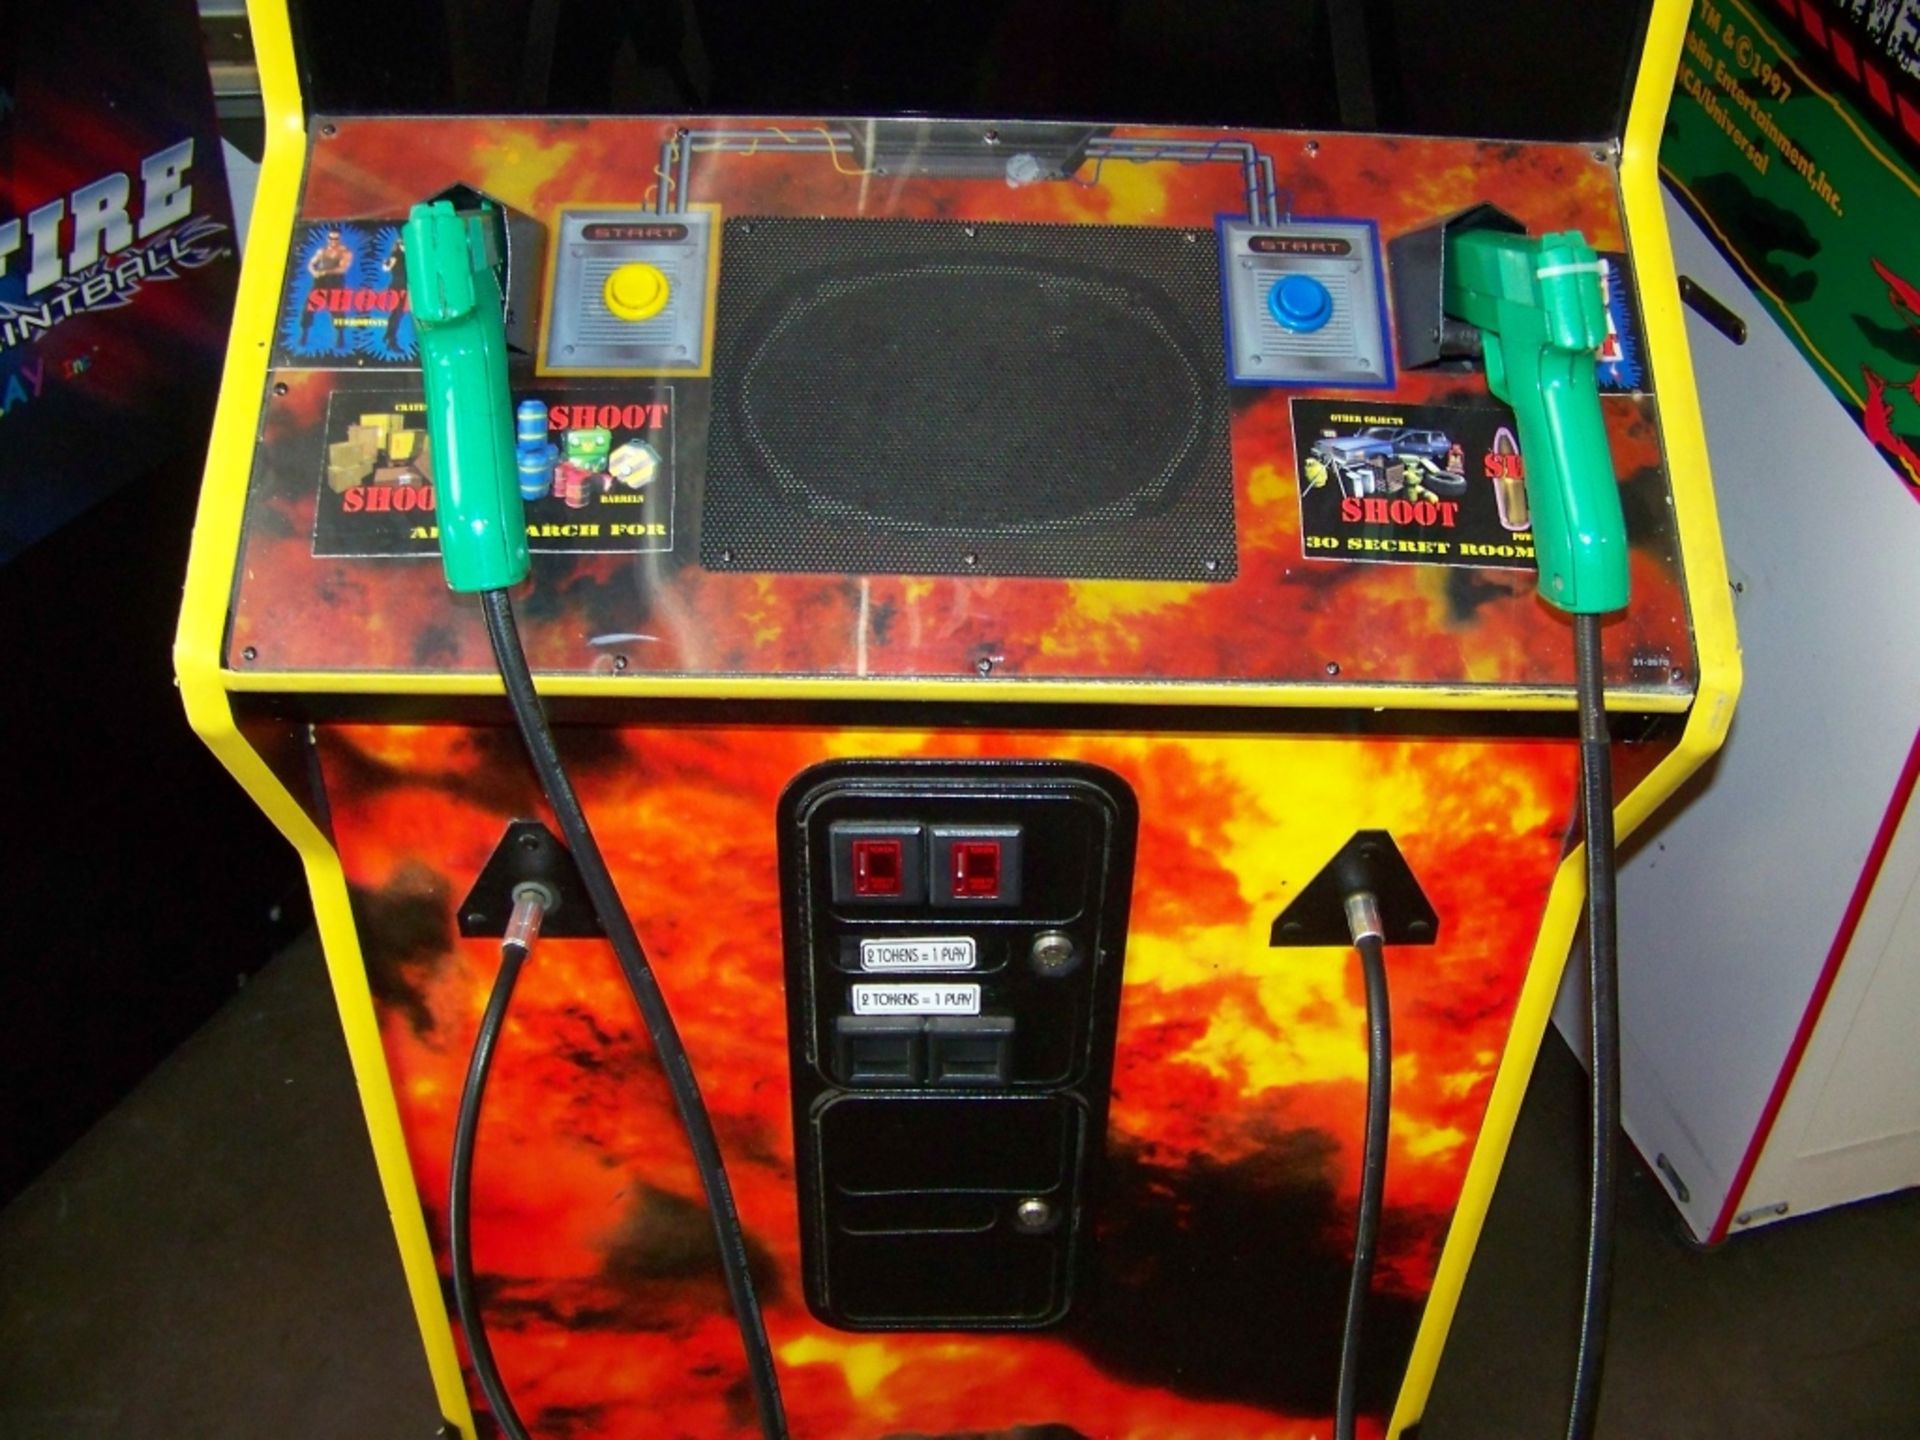 MAXIMUM FORCE DEDICATED SHOOTER ARCADE GAME M Item is in used condition. Evidence of wear and - Image 6 of 7